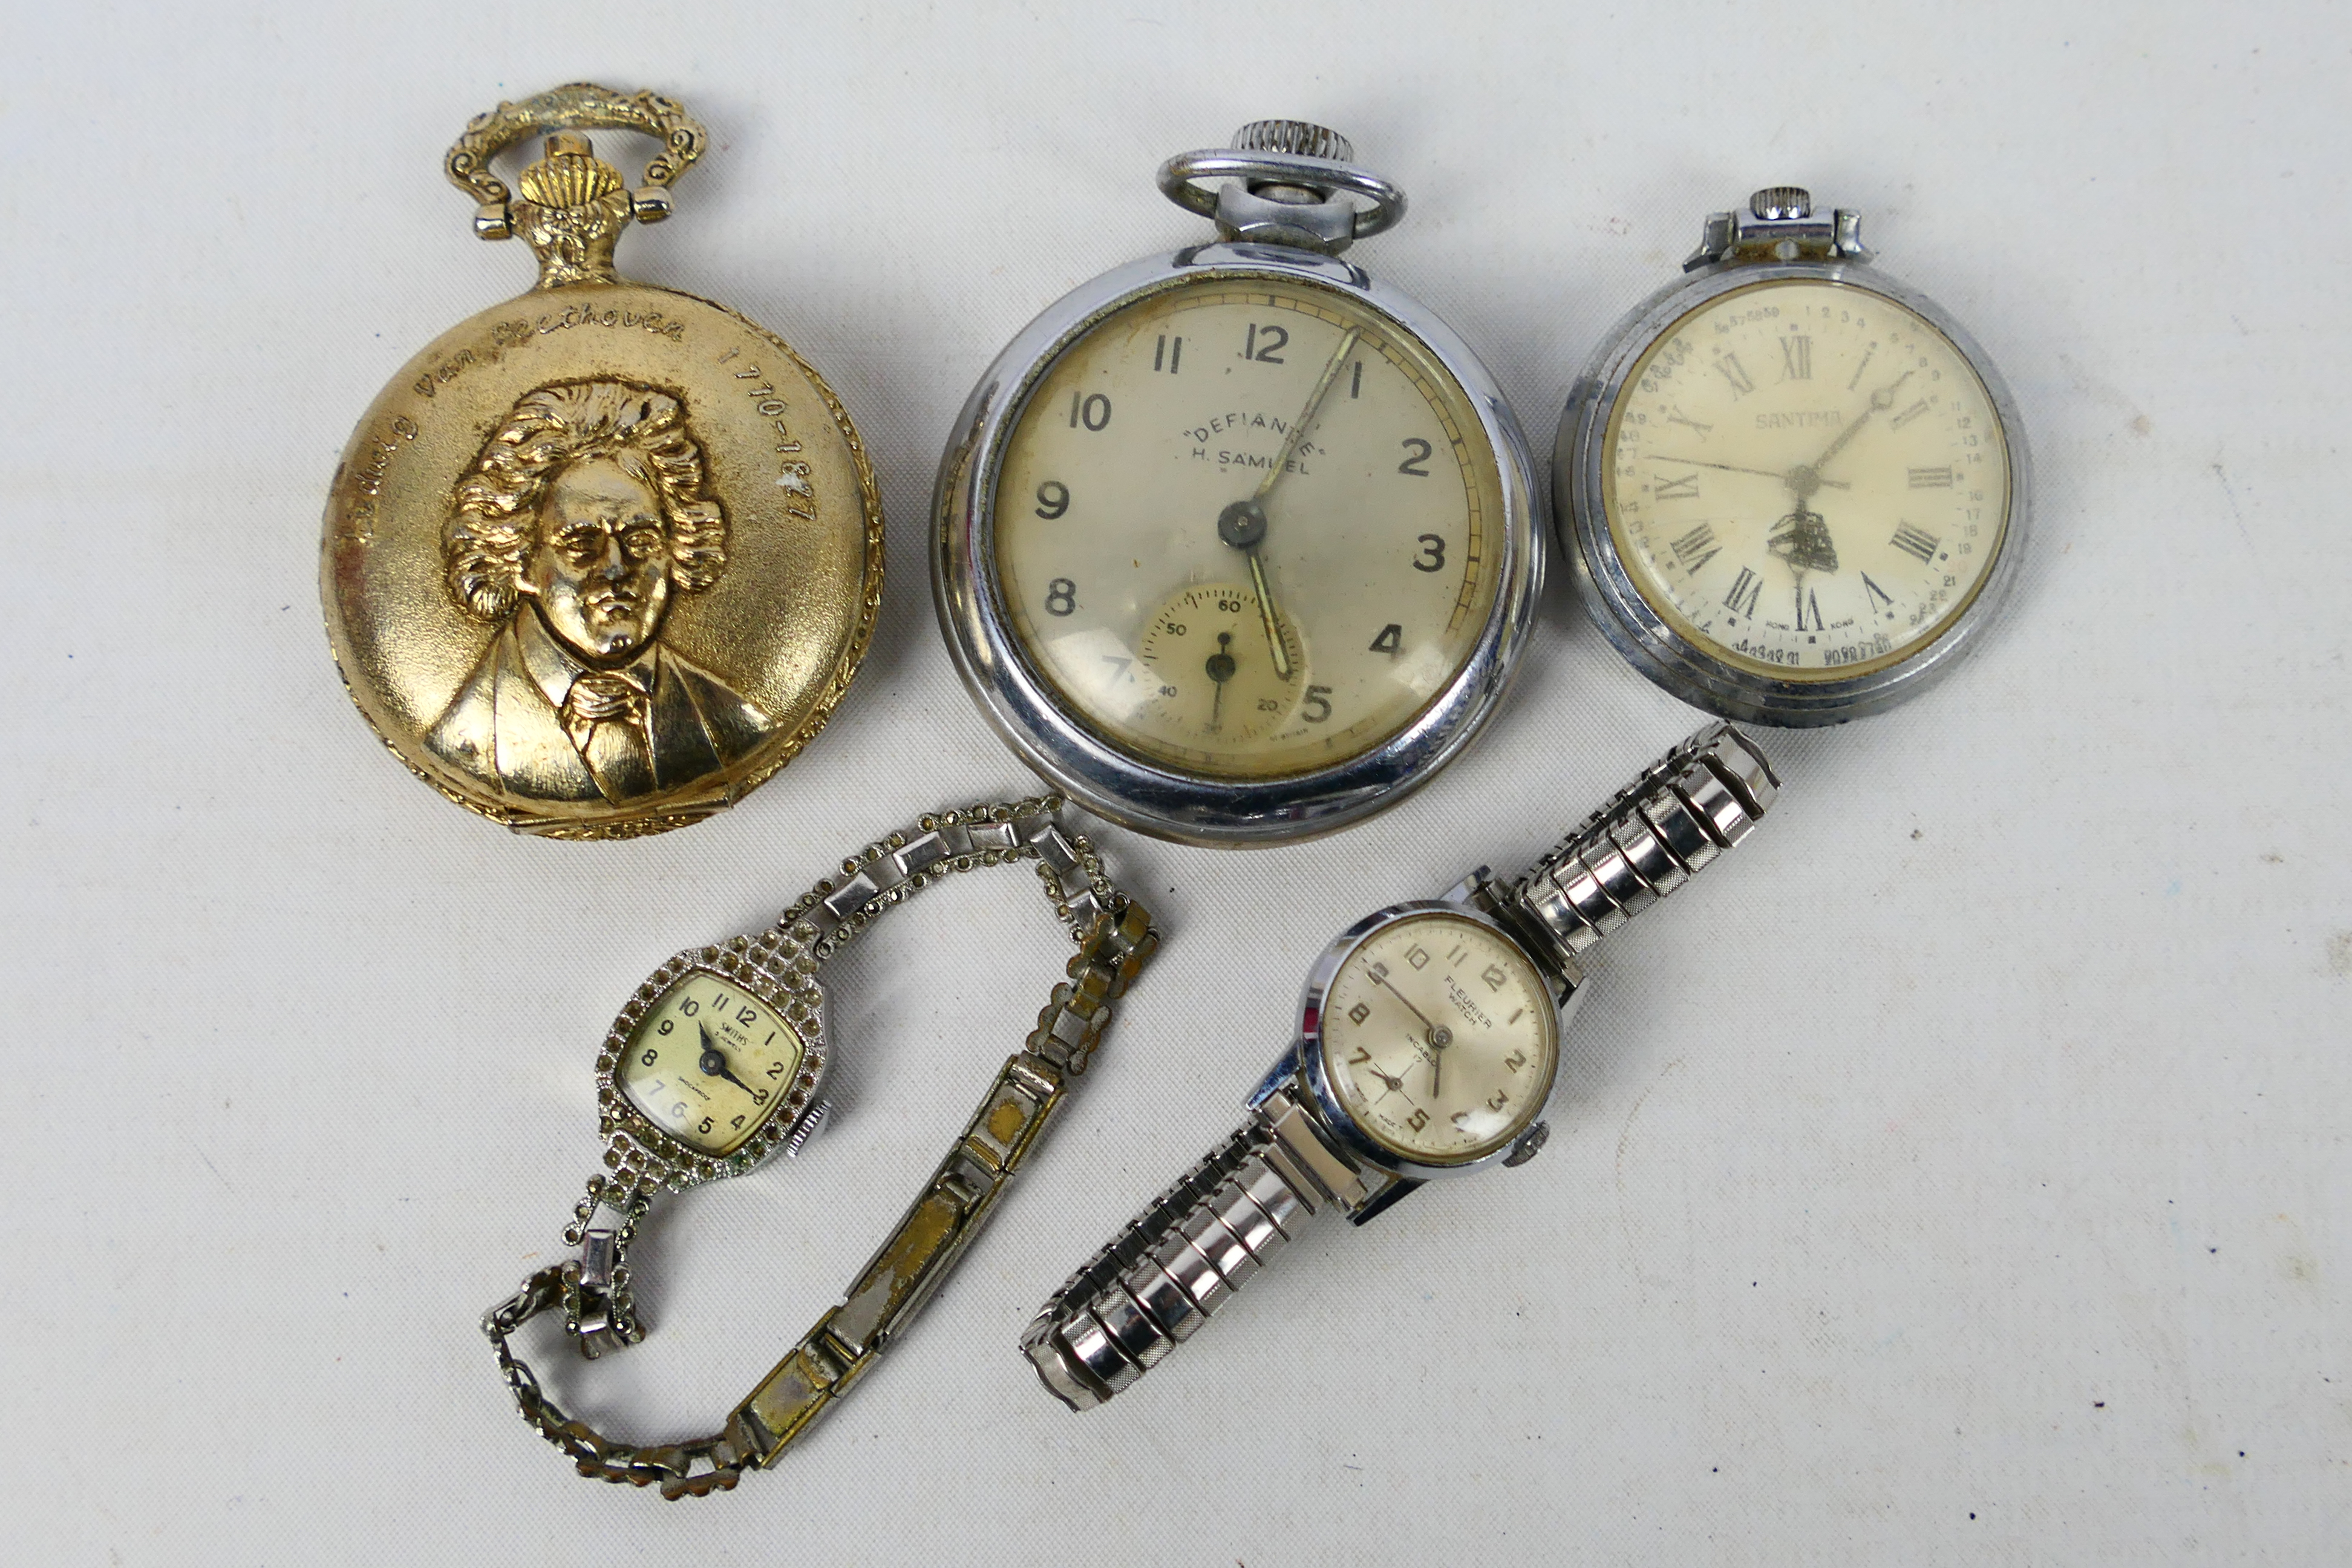 A collection or wrist watches and pocket watches.